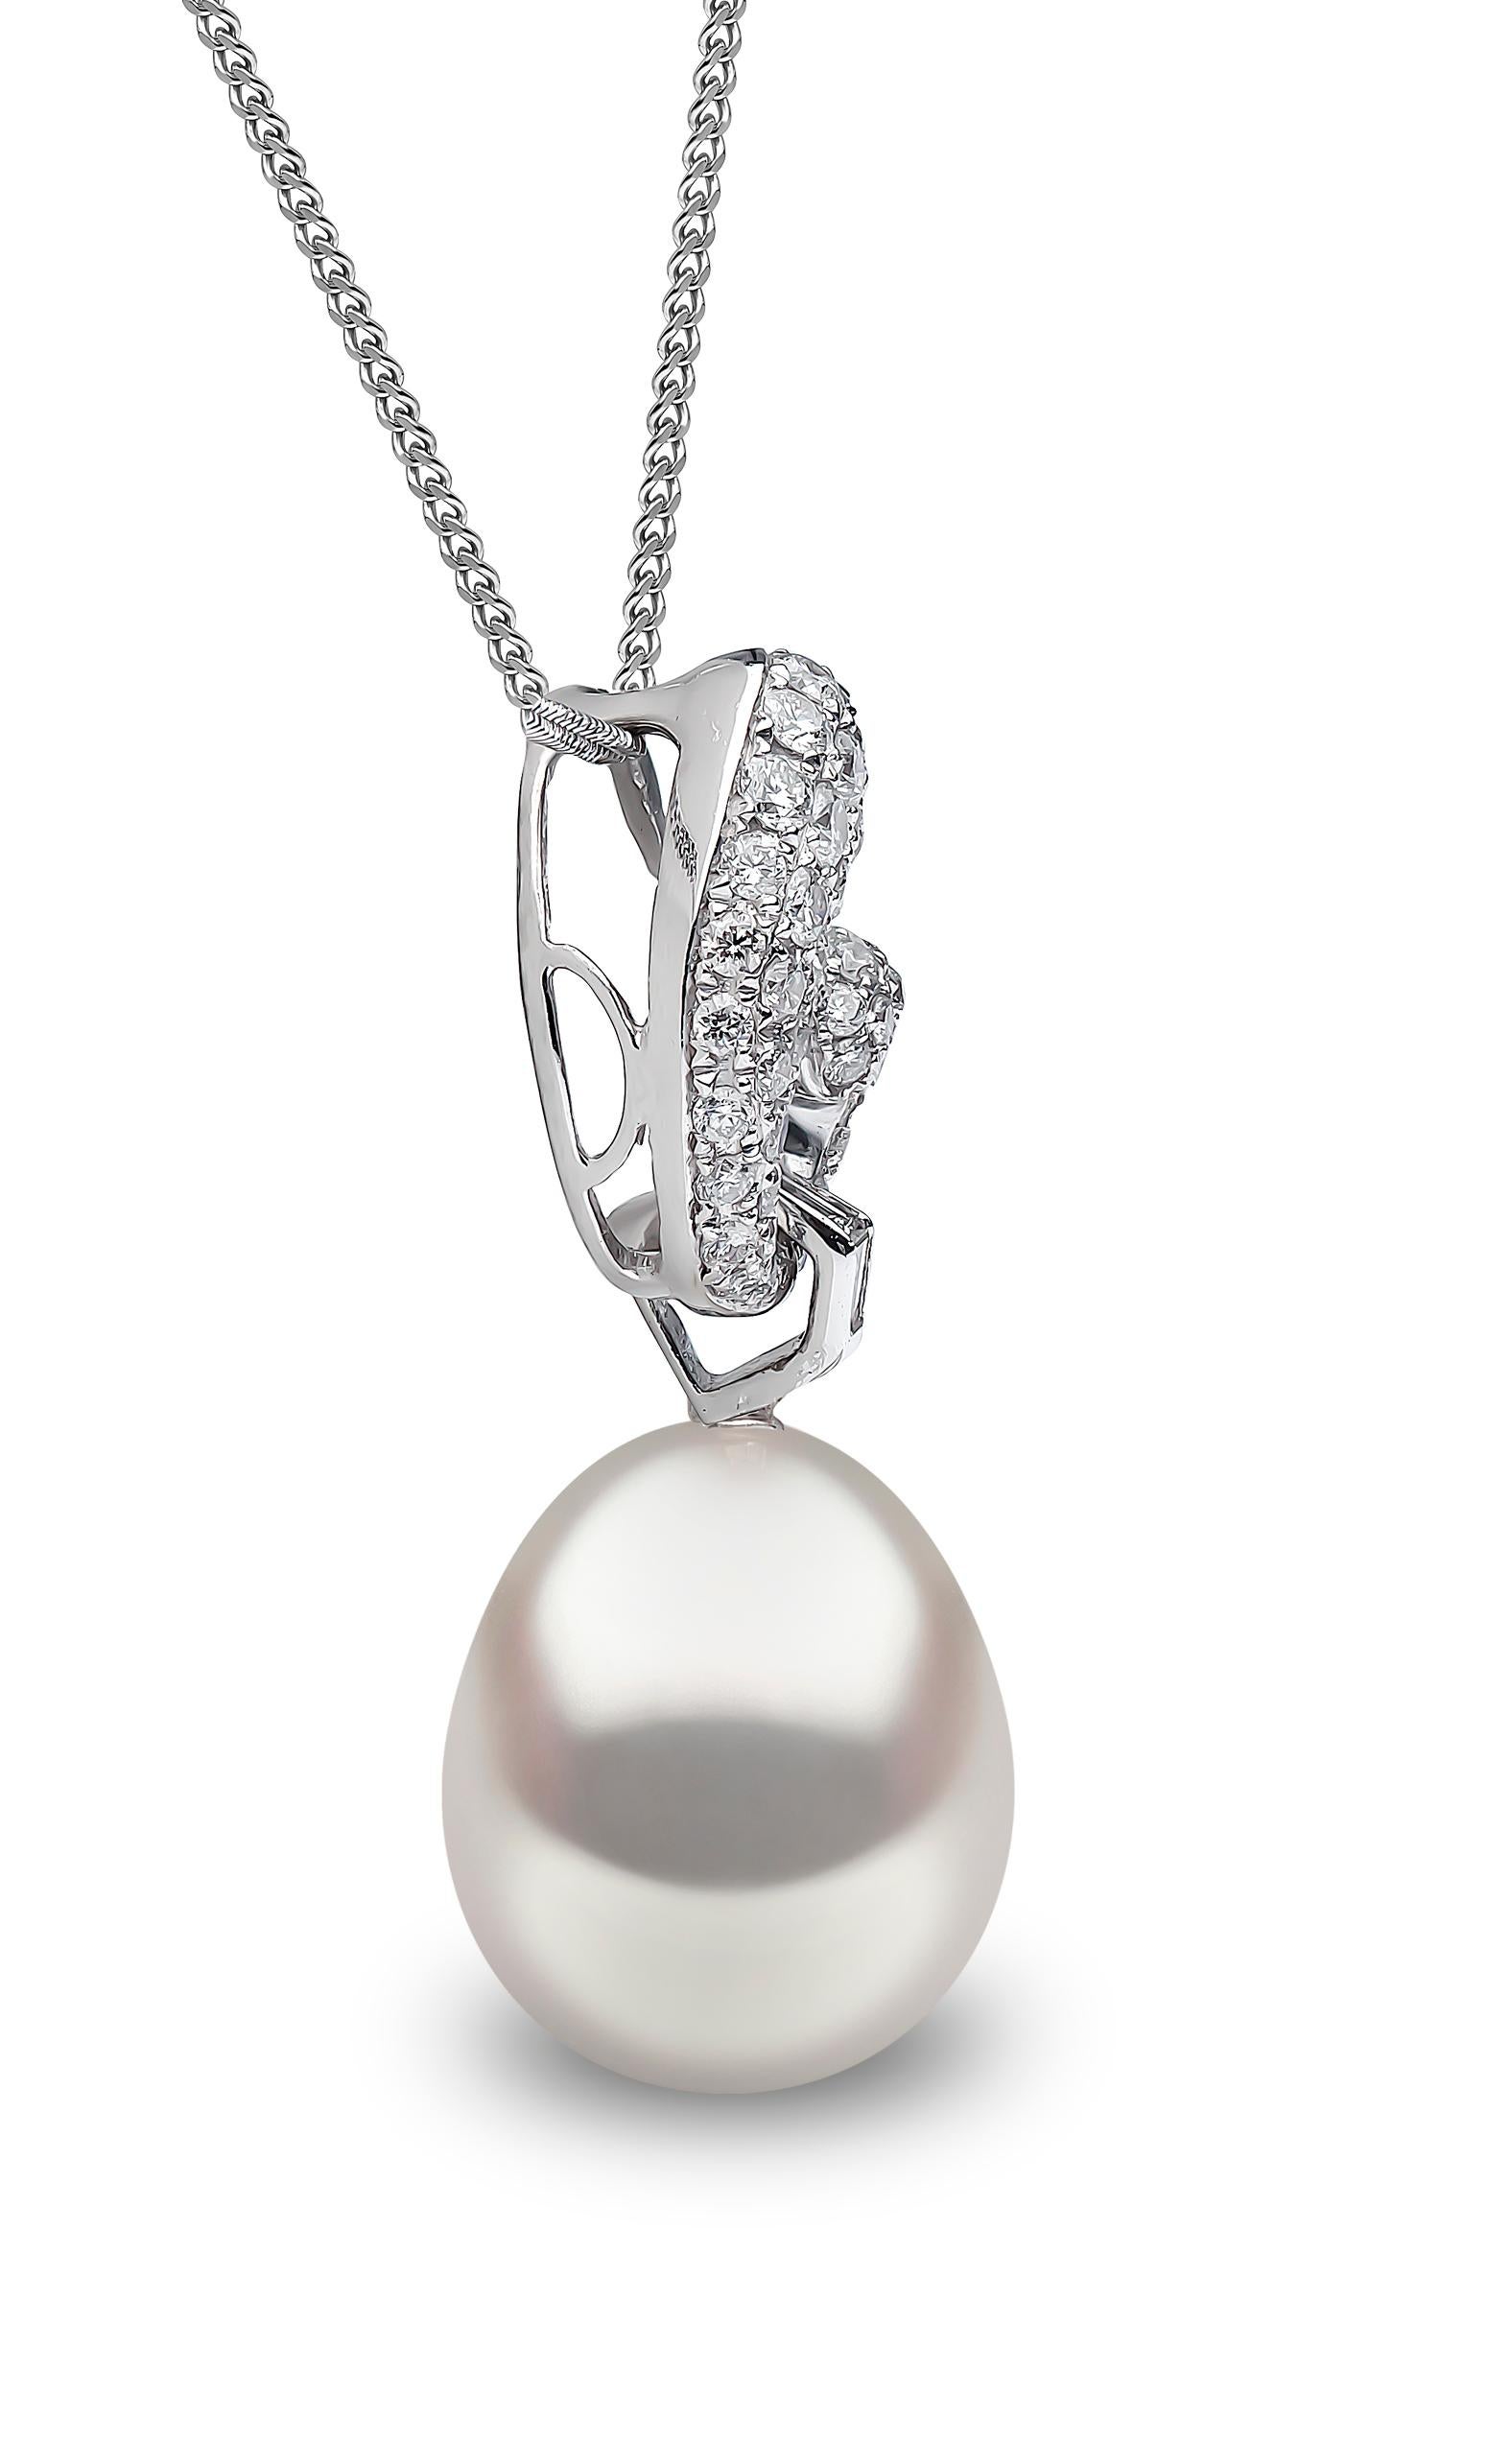 This contemporary pendant by Yoko London features a spectacular 13.1mm drop shape South Sea pearl beneath a pave diamond swirl. Effortlessly elegant, this pendant will look great paired with both daytime and evening looks. 
-	13.1mm Drop Shaped